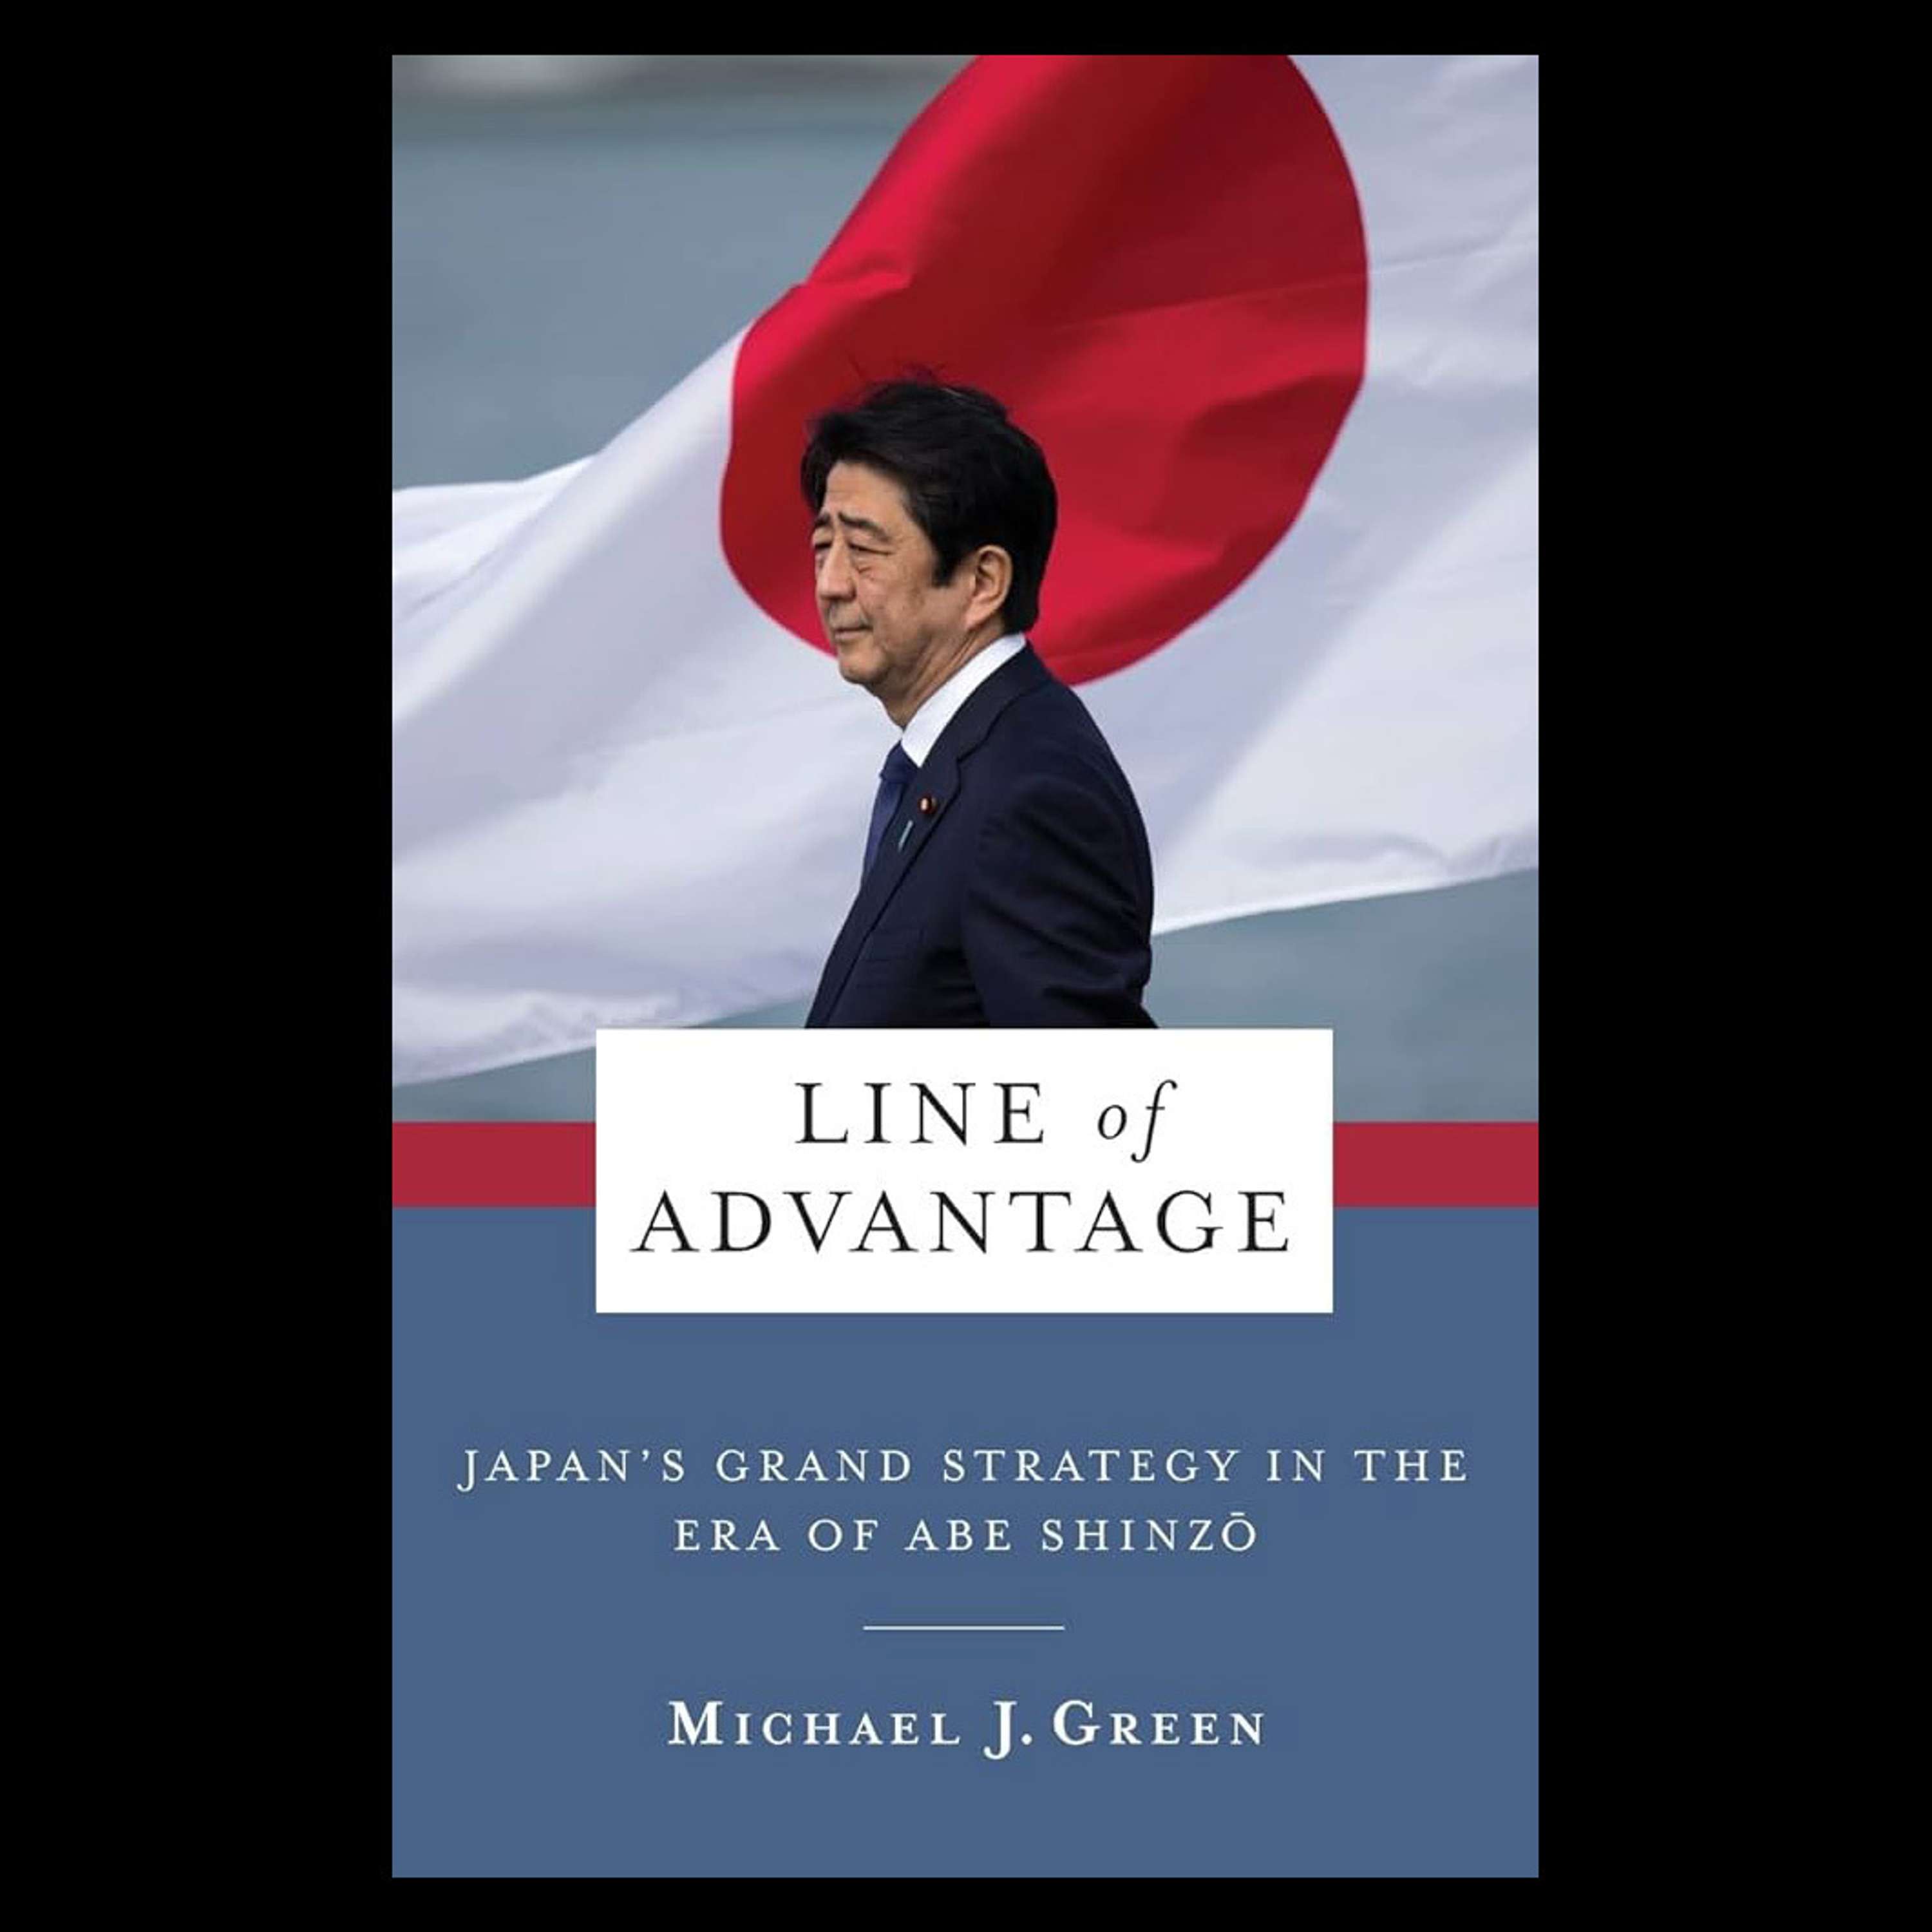 Line of Advantage: Japan’s Grand Strategy in the Era of Abe Shinzo with Dr Michael J Green